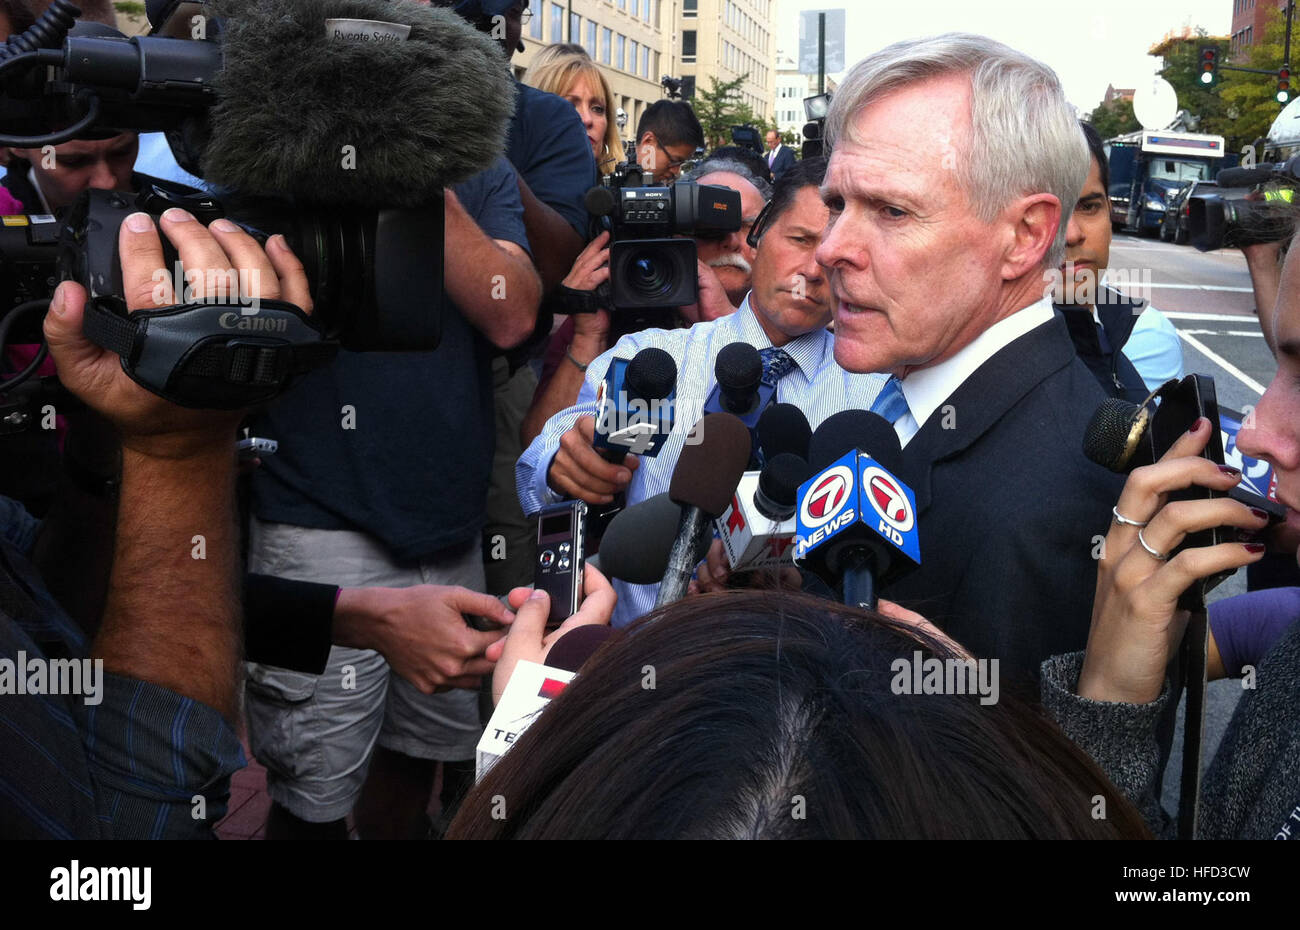 WASHINGTON (Sept. 16, 2013) Secretary of the Navy (SECNAV) Ray Mabus is interviewed by local and national media near the Washington Navy Yard about a shooting at the Navy Yard. (U.S. Navy photo by Ed Buice/Released) 130916-N-ZZ999-103 Join the conversation http://www.navy.mil/viewGallery.asp http://www.facebook.com/USNavy http://www.twitter.com/USNavy http://navylive.dodlive.mil http://pinterest.com https://plus.google.com SECNAV gives interviews to local and national media. (9789019665) Stock Photo